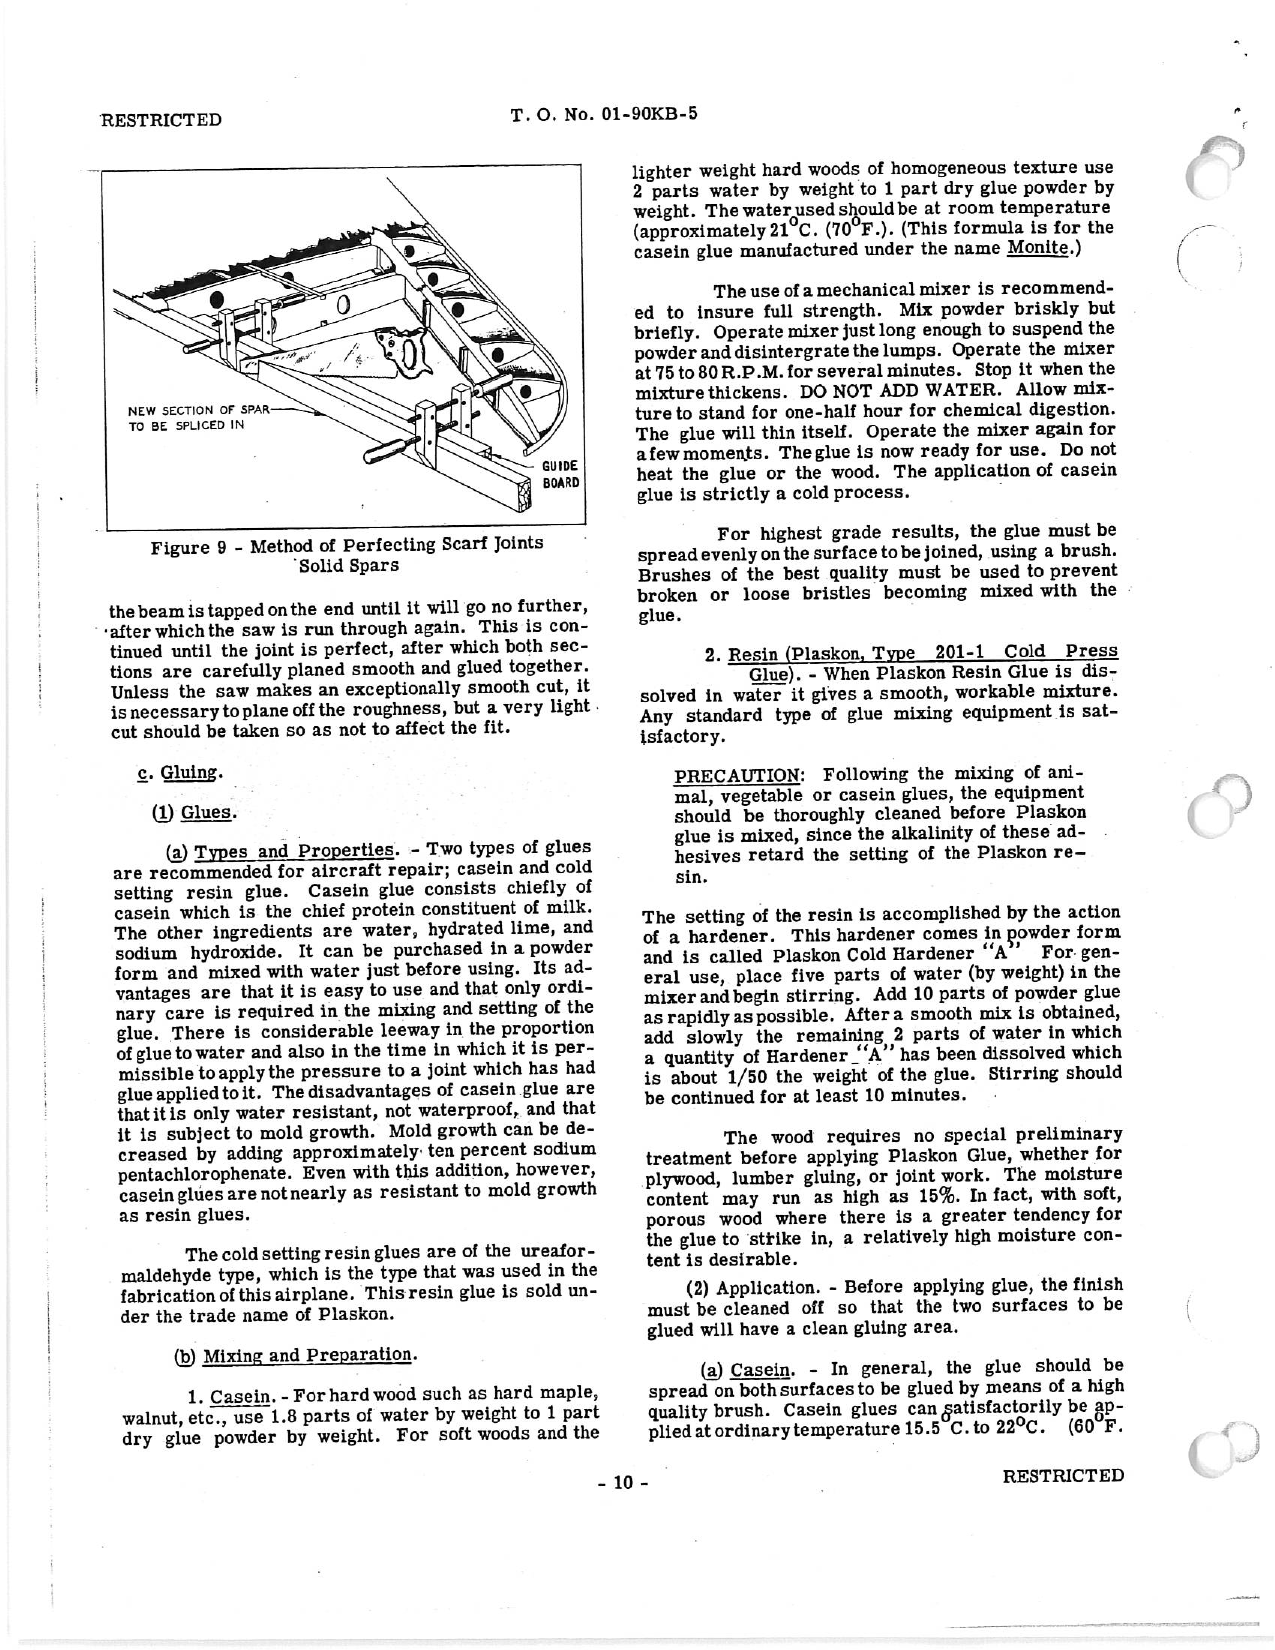 Sample page 14 from AirCorps Library document: Structural Repair Instructions: AT-10